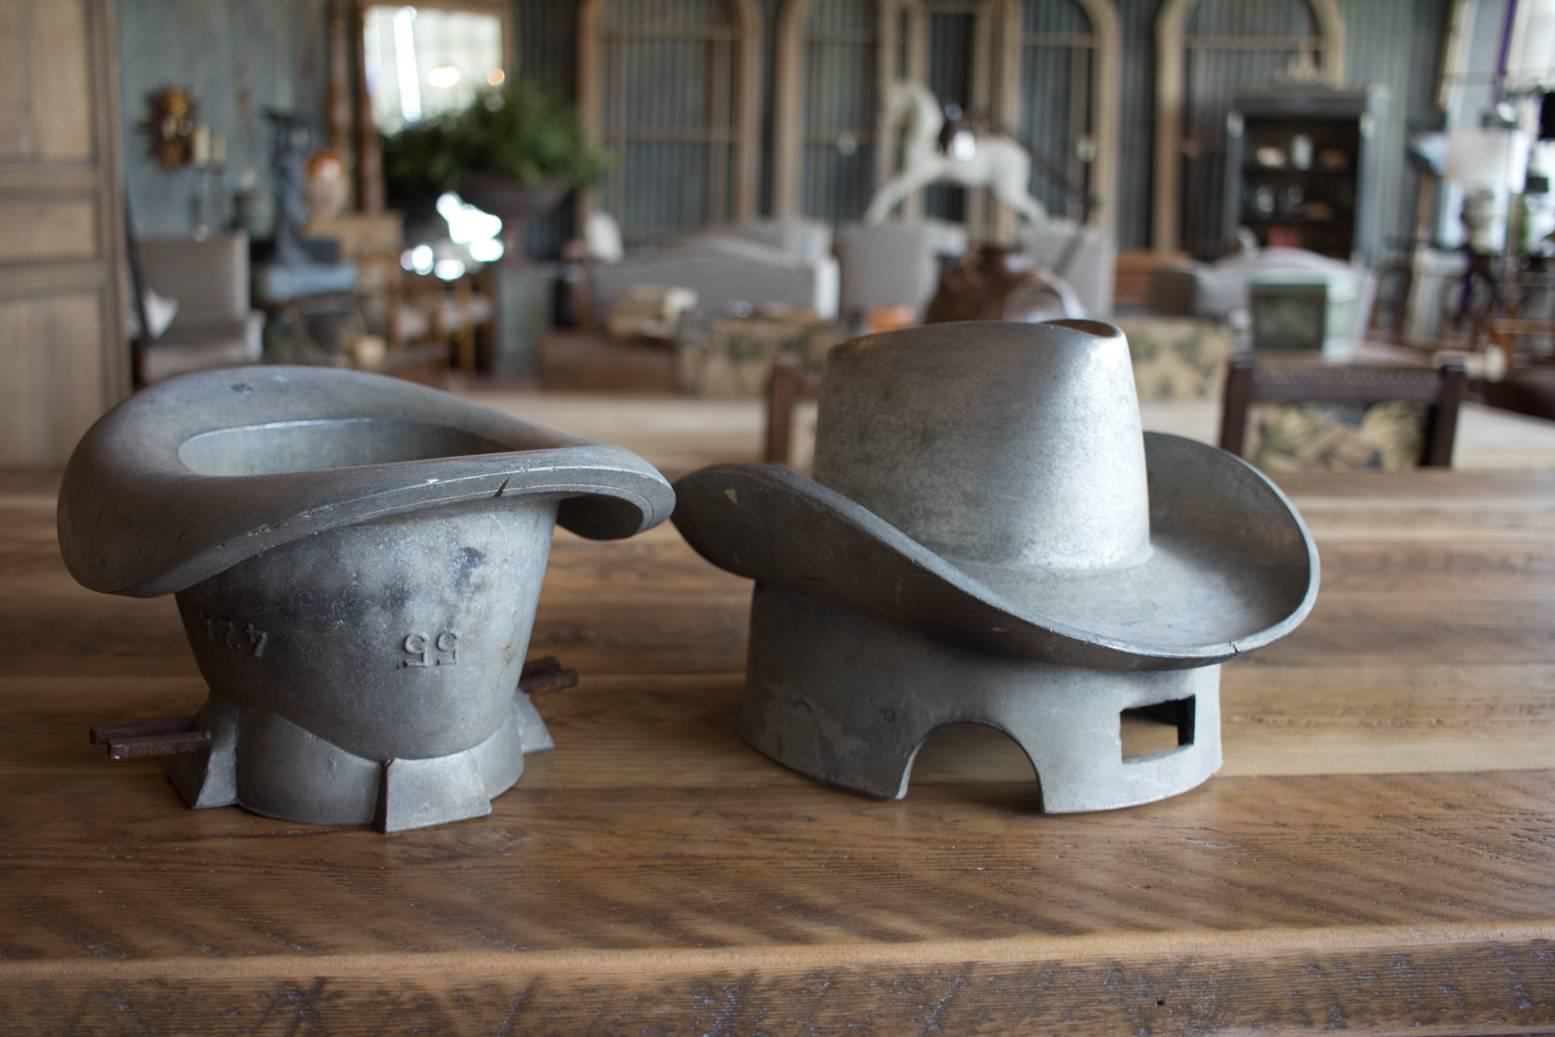 Beautiful sculptural European cast metal positive and negative hat molds. Molds were made in Lyon, France and Brussels, Belgium.

When making a hat, both positive and negative were required to make the brim. The fabric would be sandwiched between